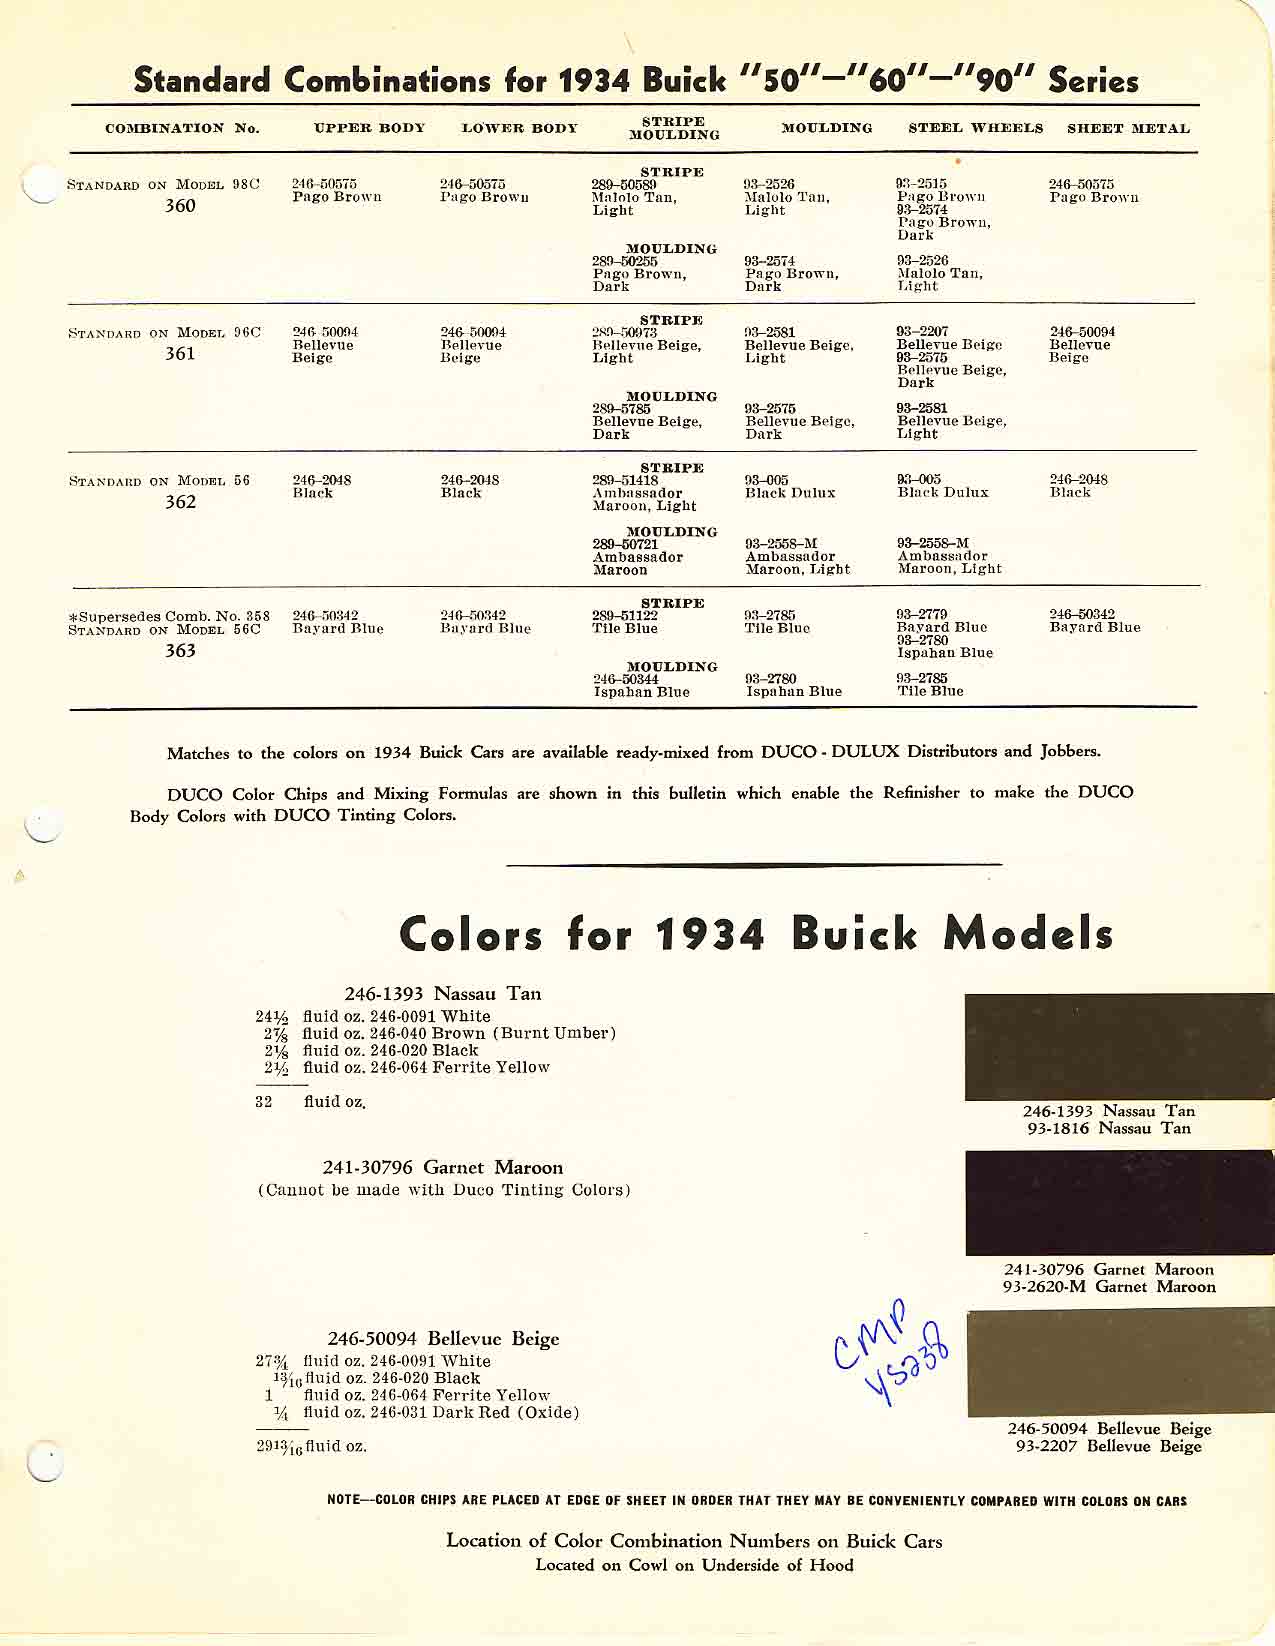 Colors used on Buick Vehicles in 1934